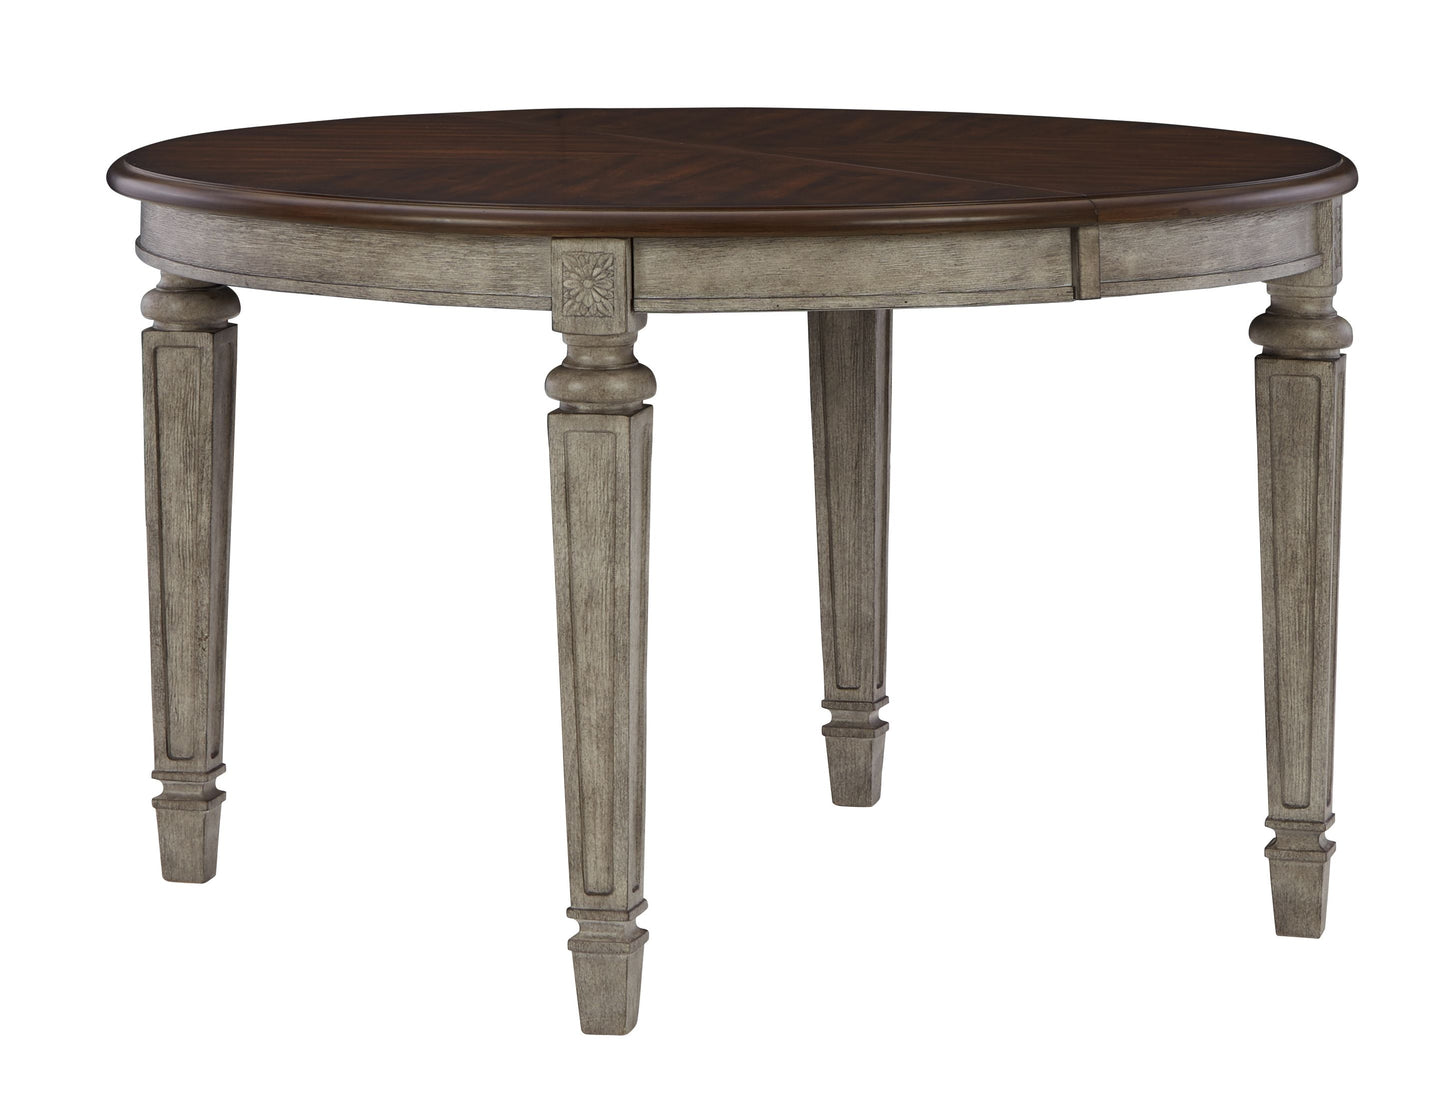 Lodenbay - Antique Gray - Oval Dining Room Ext Table